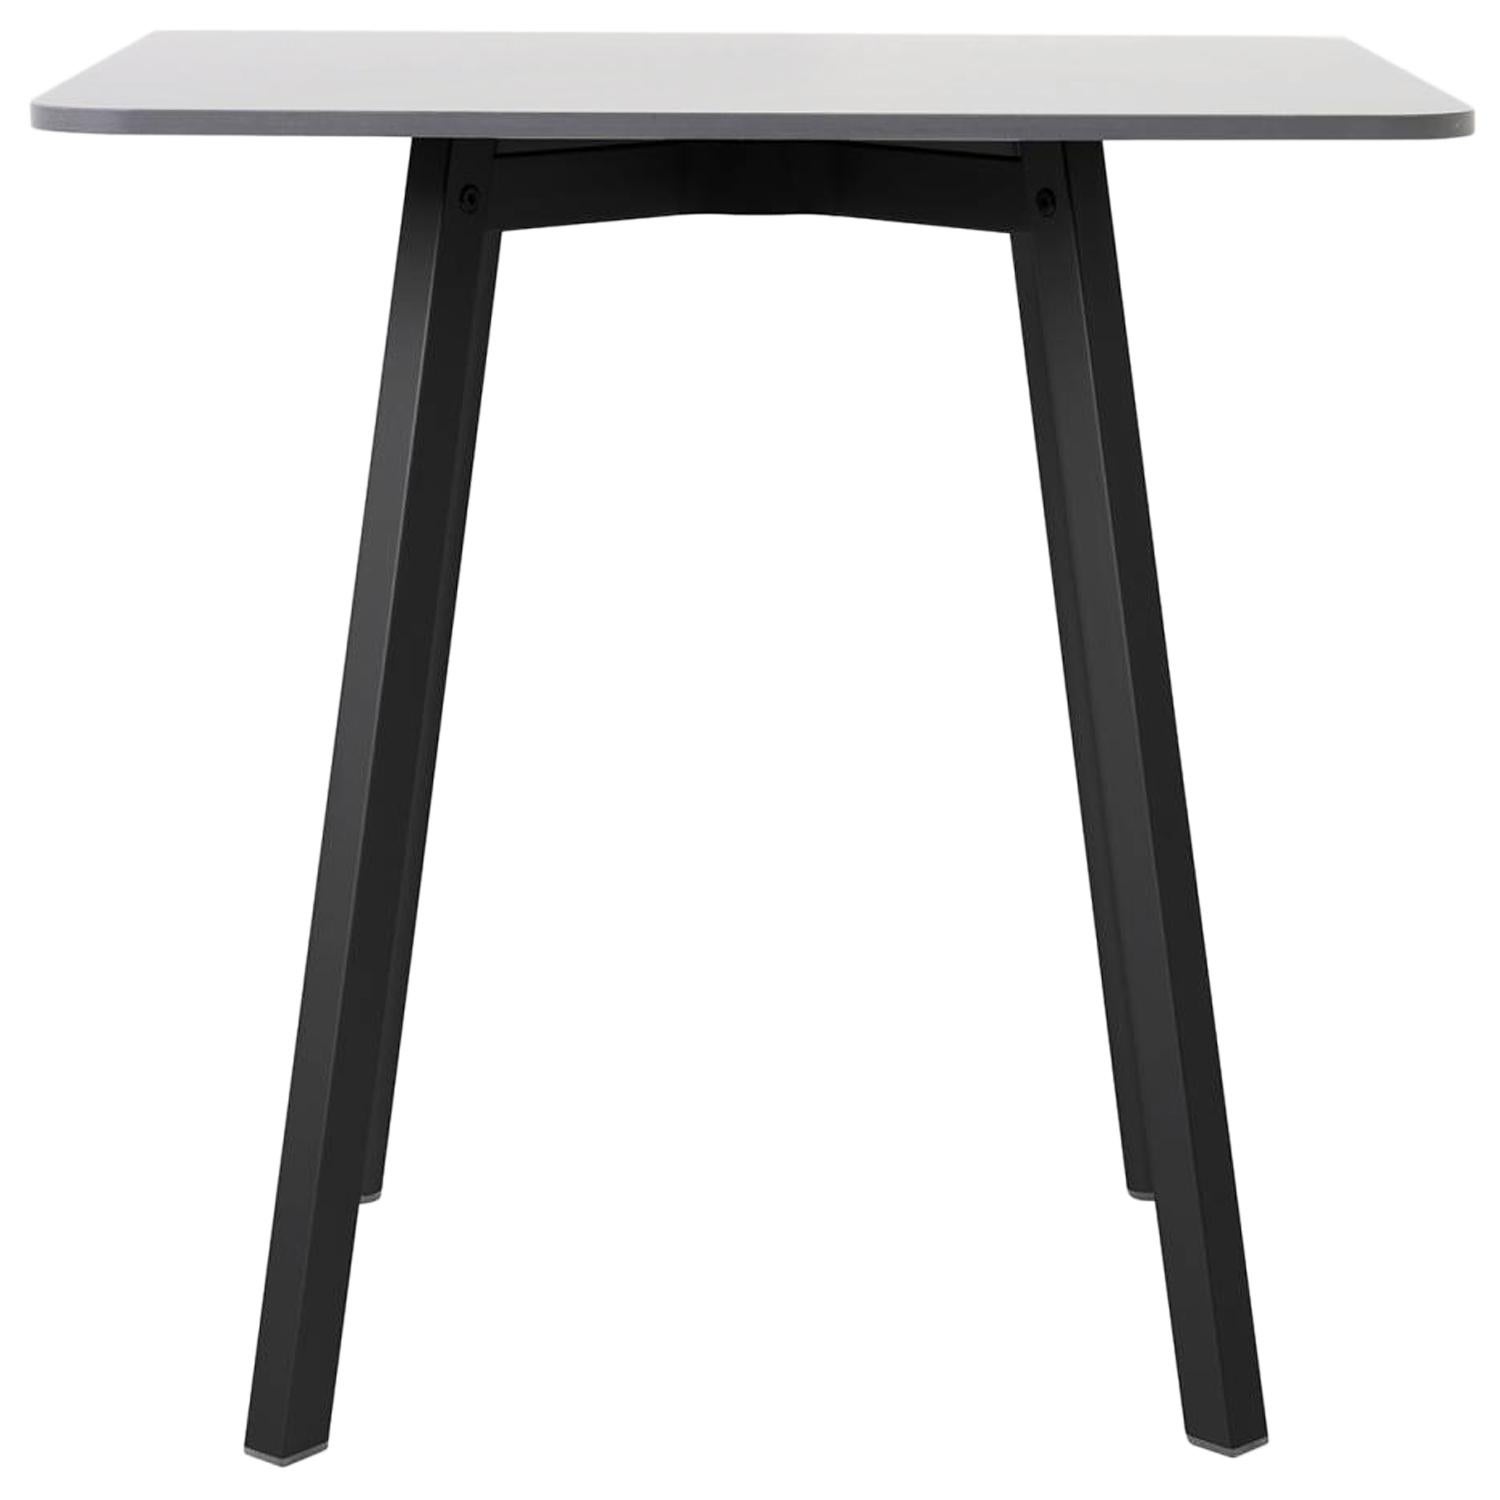 Emeco Su Small Cafe Table in Black Aluminum with White Laminate top by Nendo